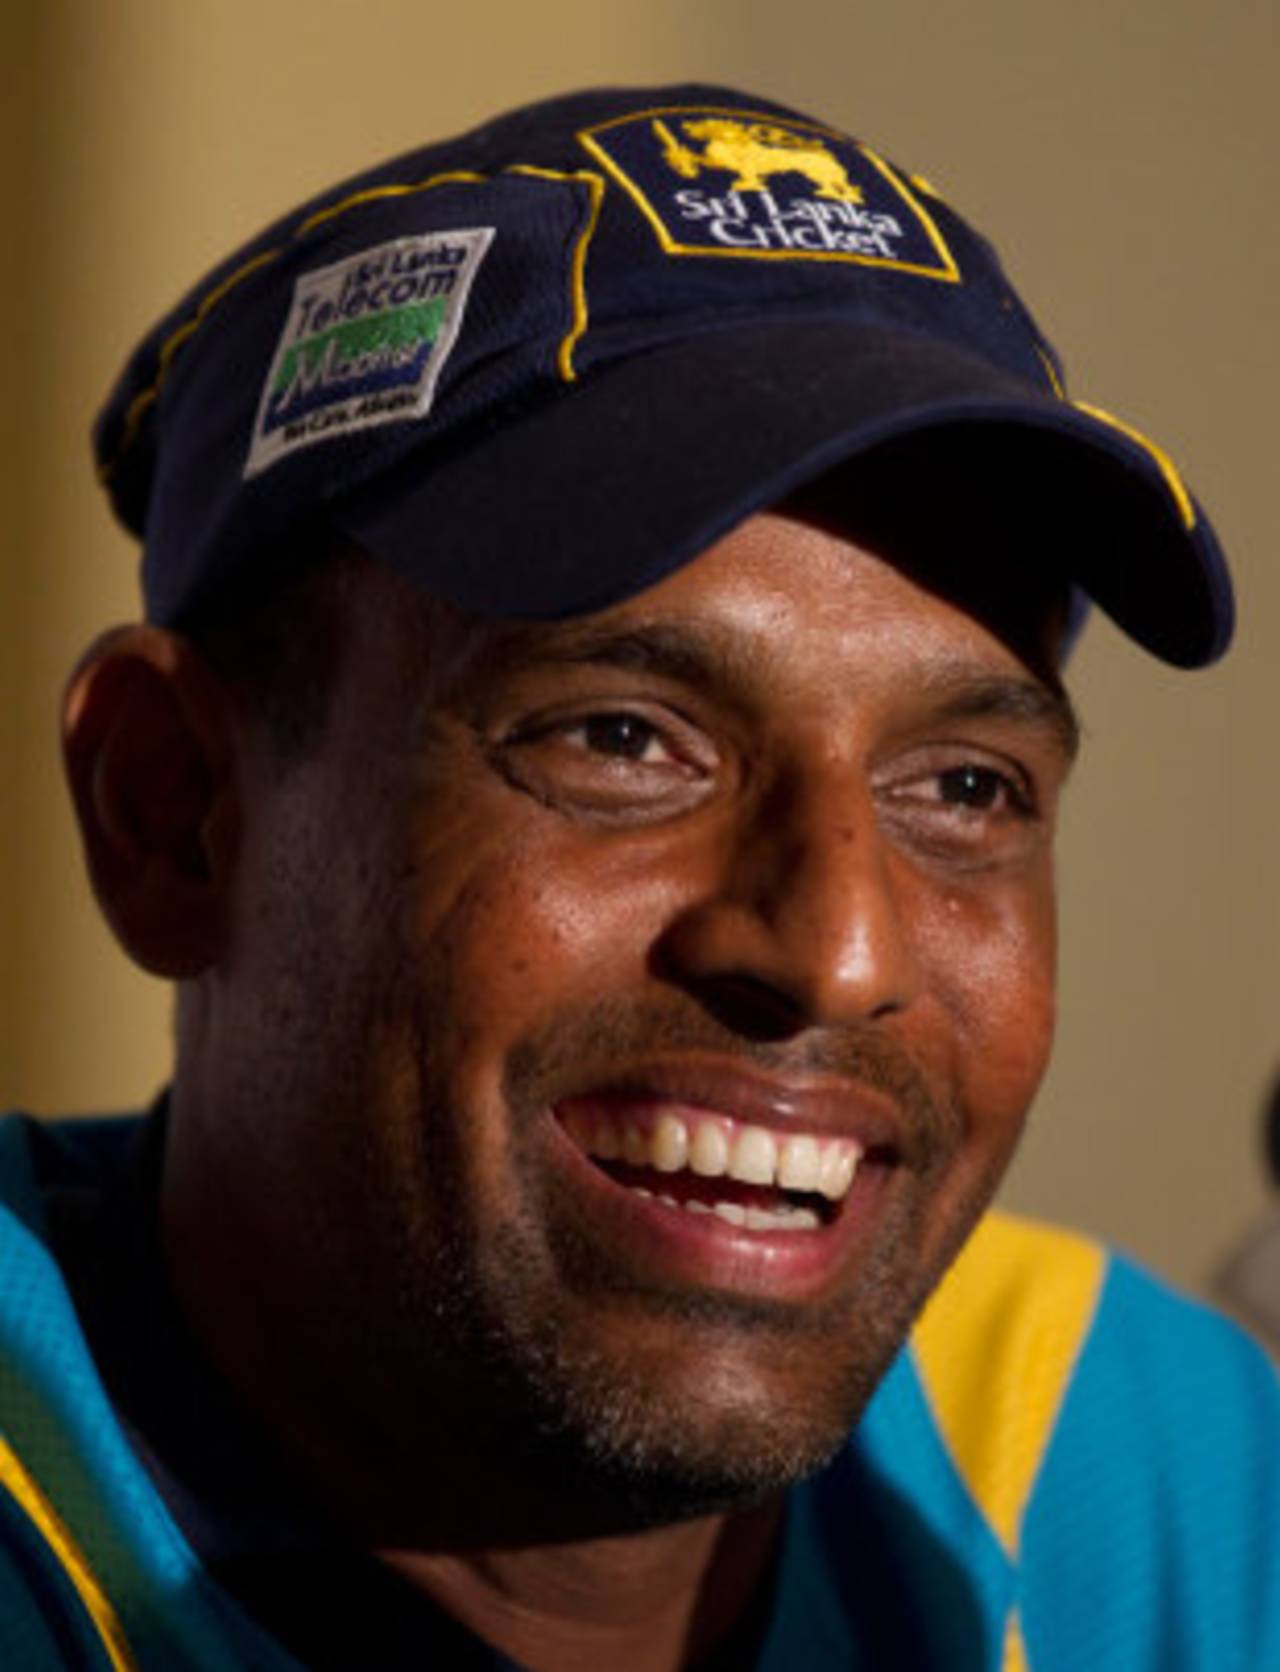 Thilan Samaraweera announced his retirement ahead of the Bangladesh Tests to give younger players a chance to play in the squad&nbsp;&nbsp;&bull;&nbsp;&nbsp;Associated Press